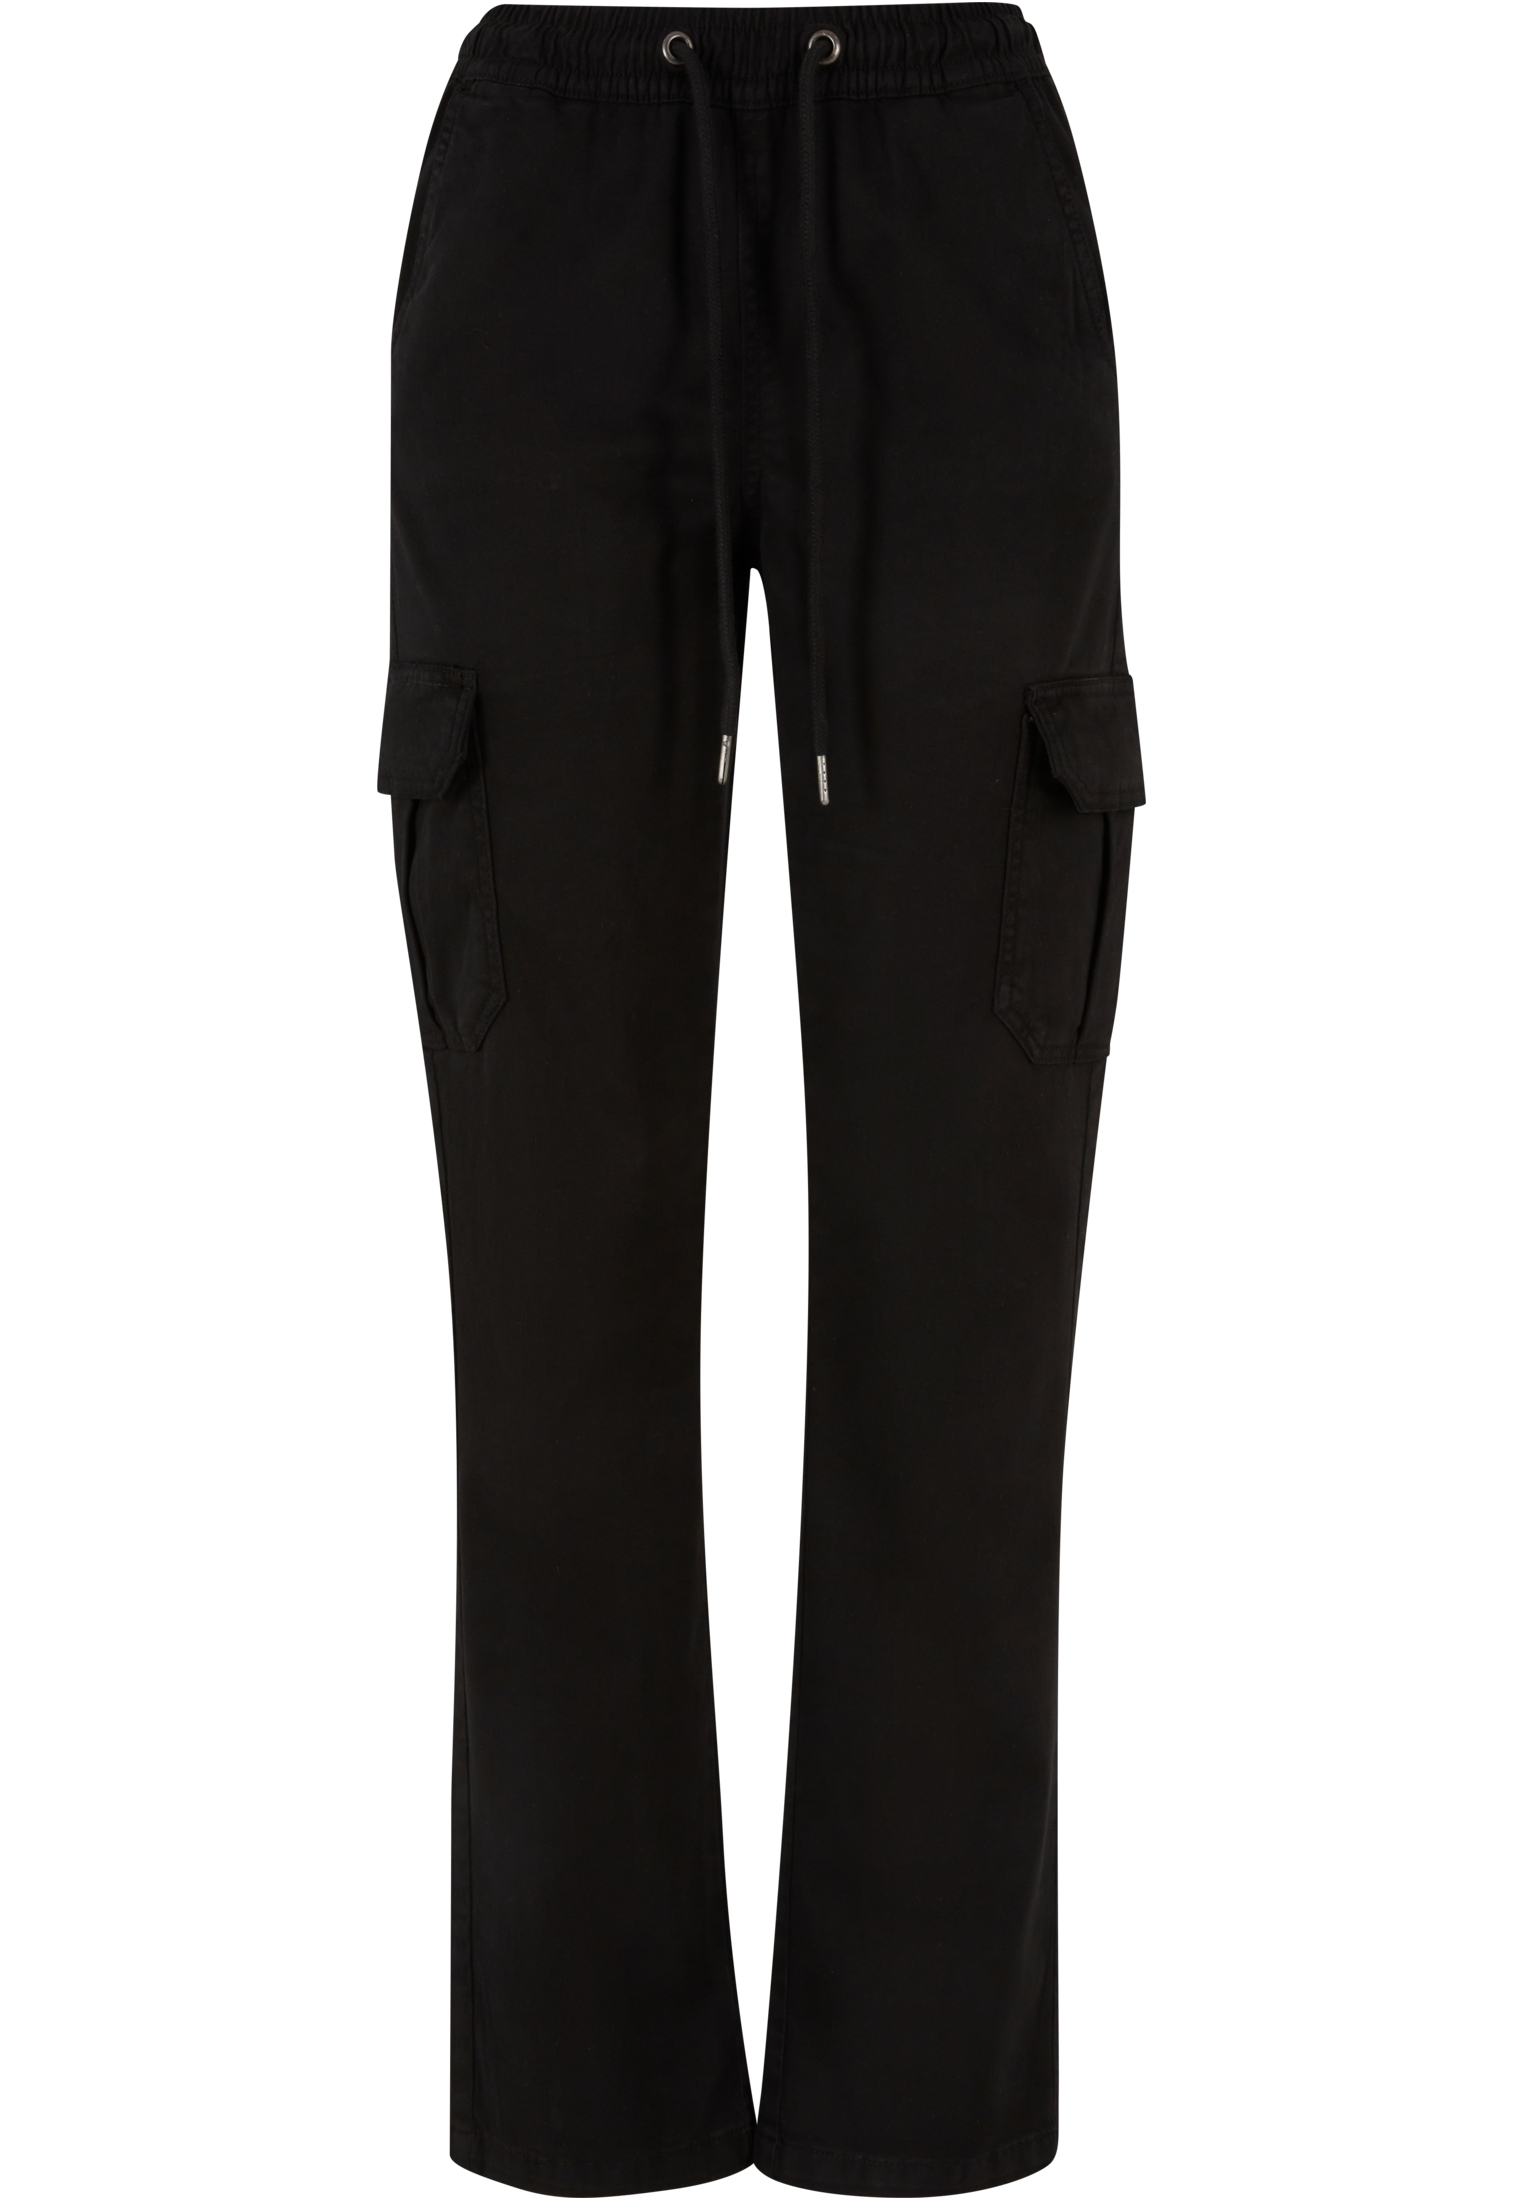 Women's Cargo Twill High Waisted Trousers - Black